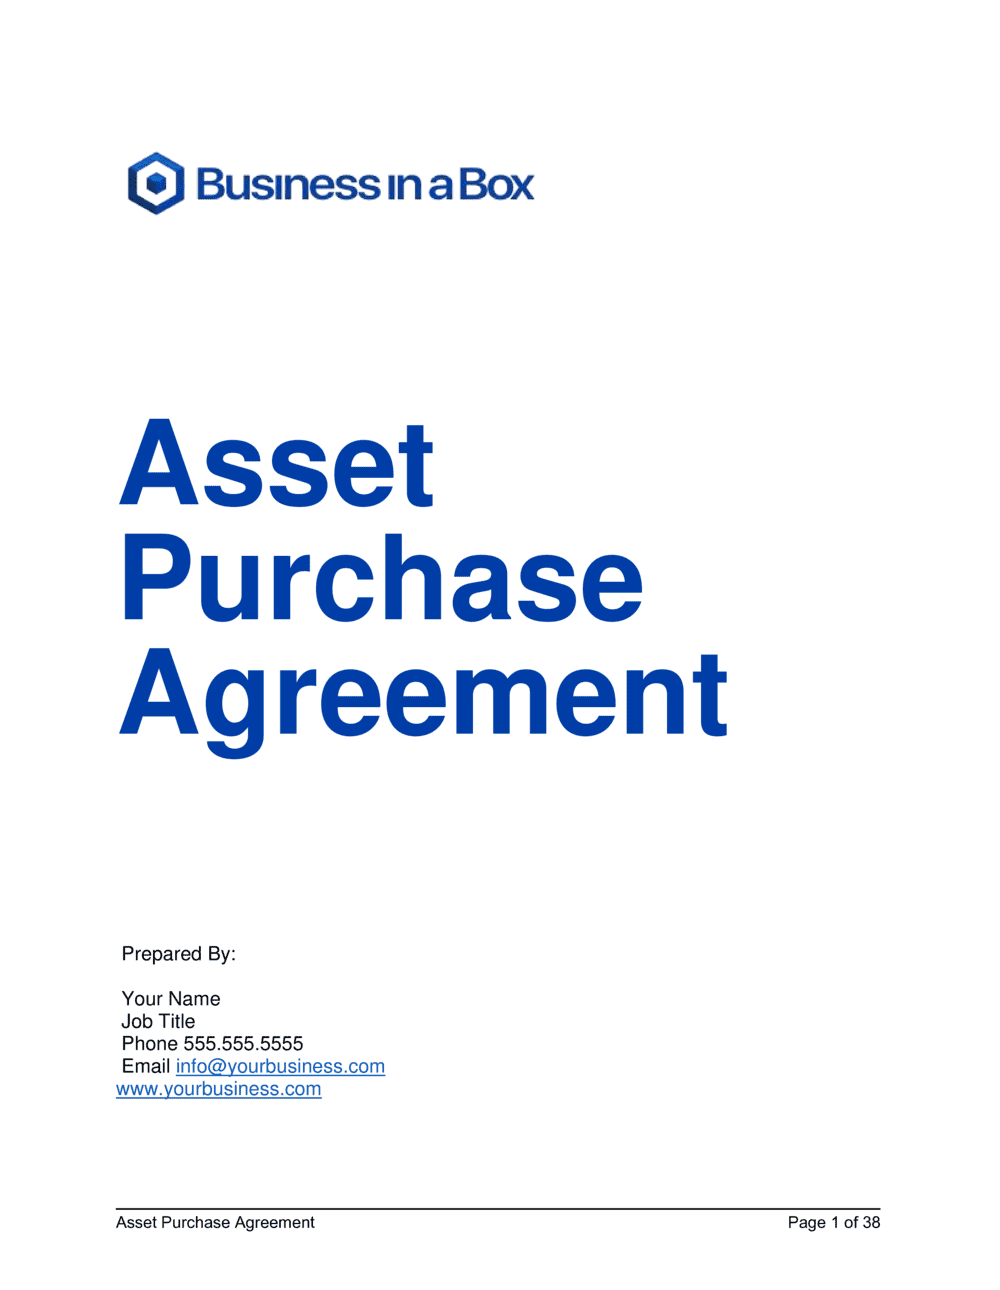 Asset Purchase Agreement Template from templates.business-in-a-box.com